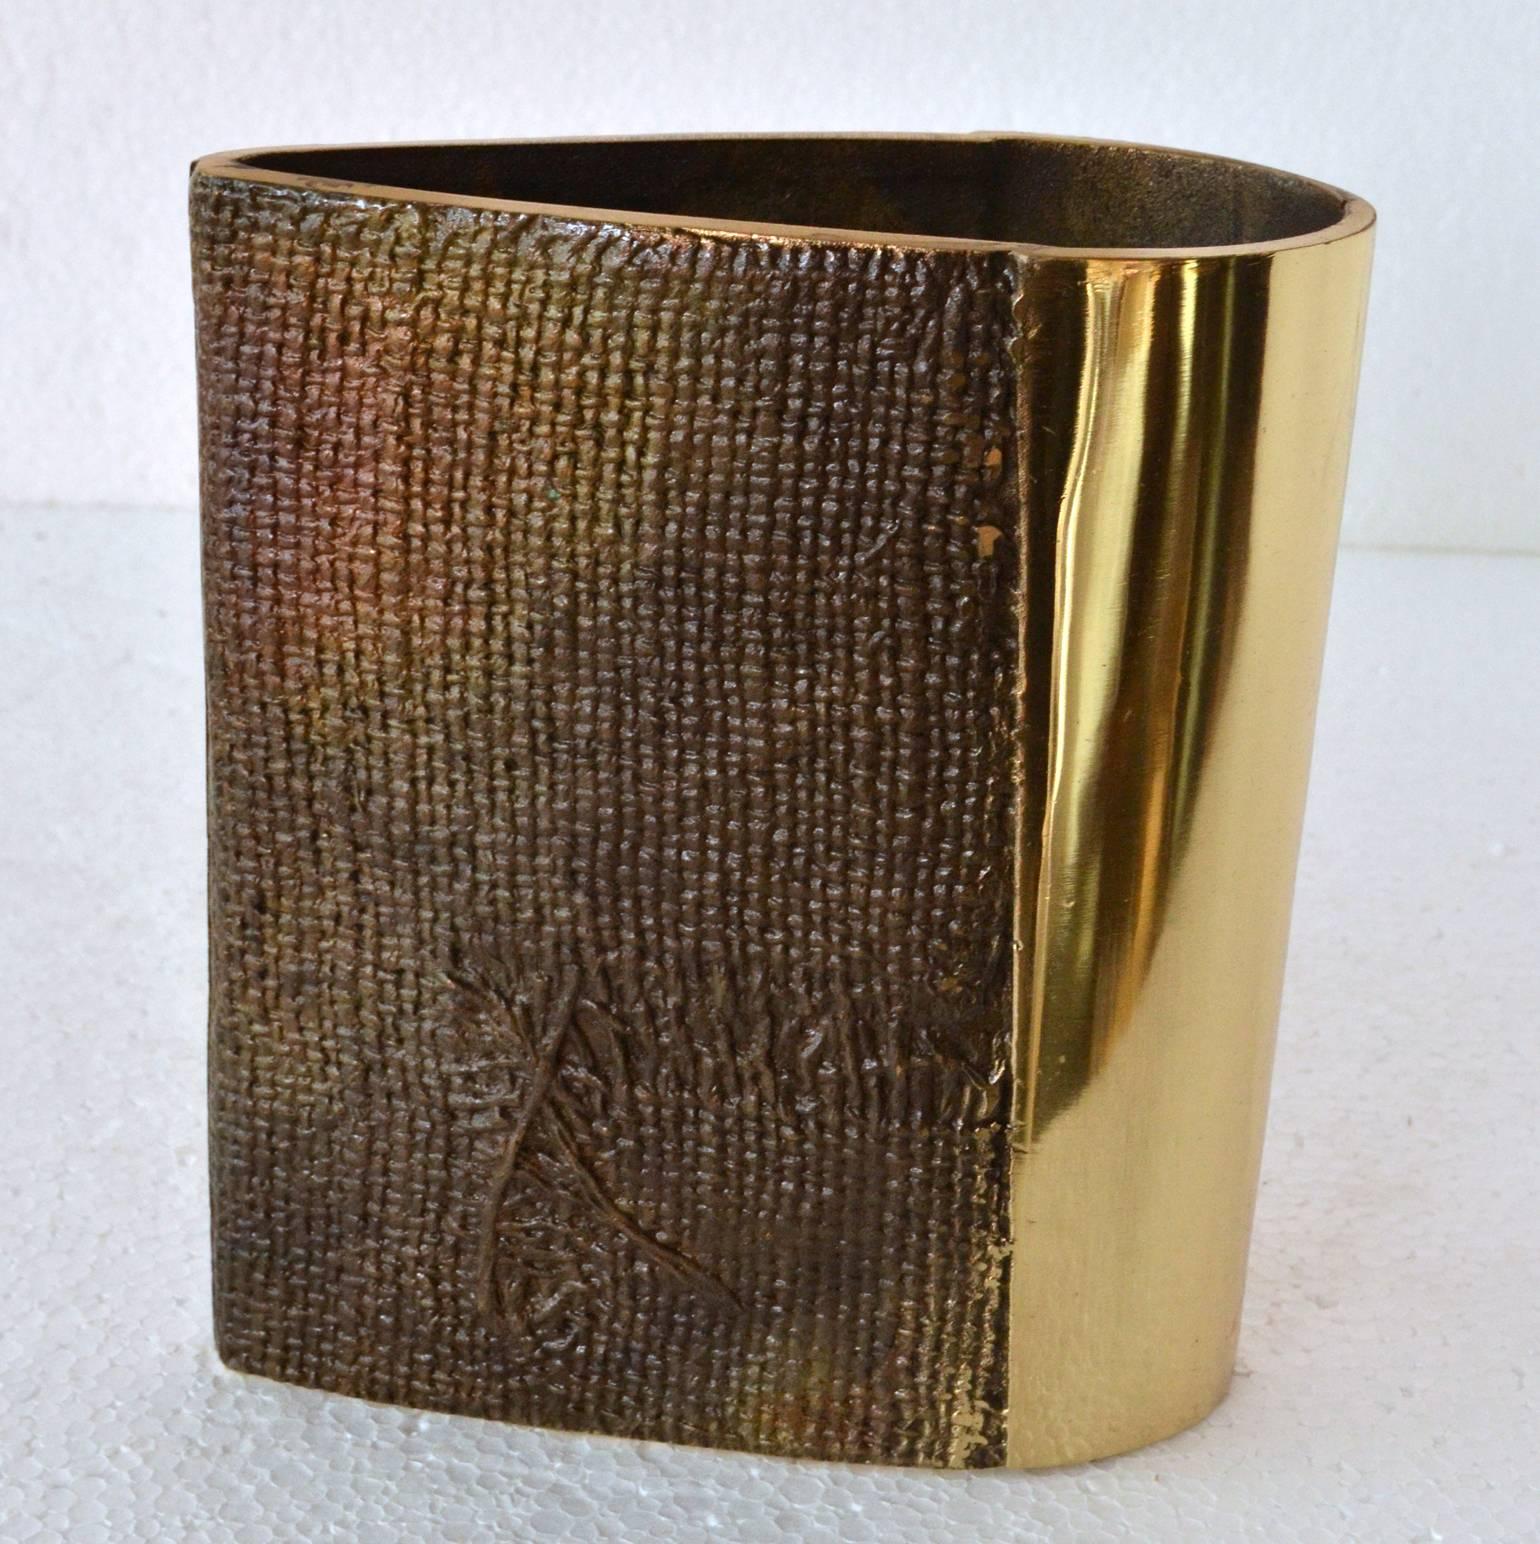 Sculptural vase with the texture of burlap imprinted in part of the vase contrasted with a high polished sheen. The vase is part of a group of high quality cast  items we present by Antonella Caprio 
Saviato made in the 1970s.